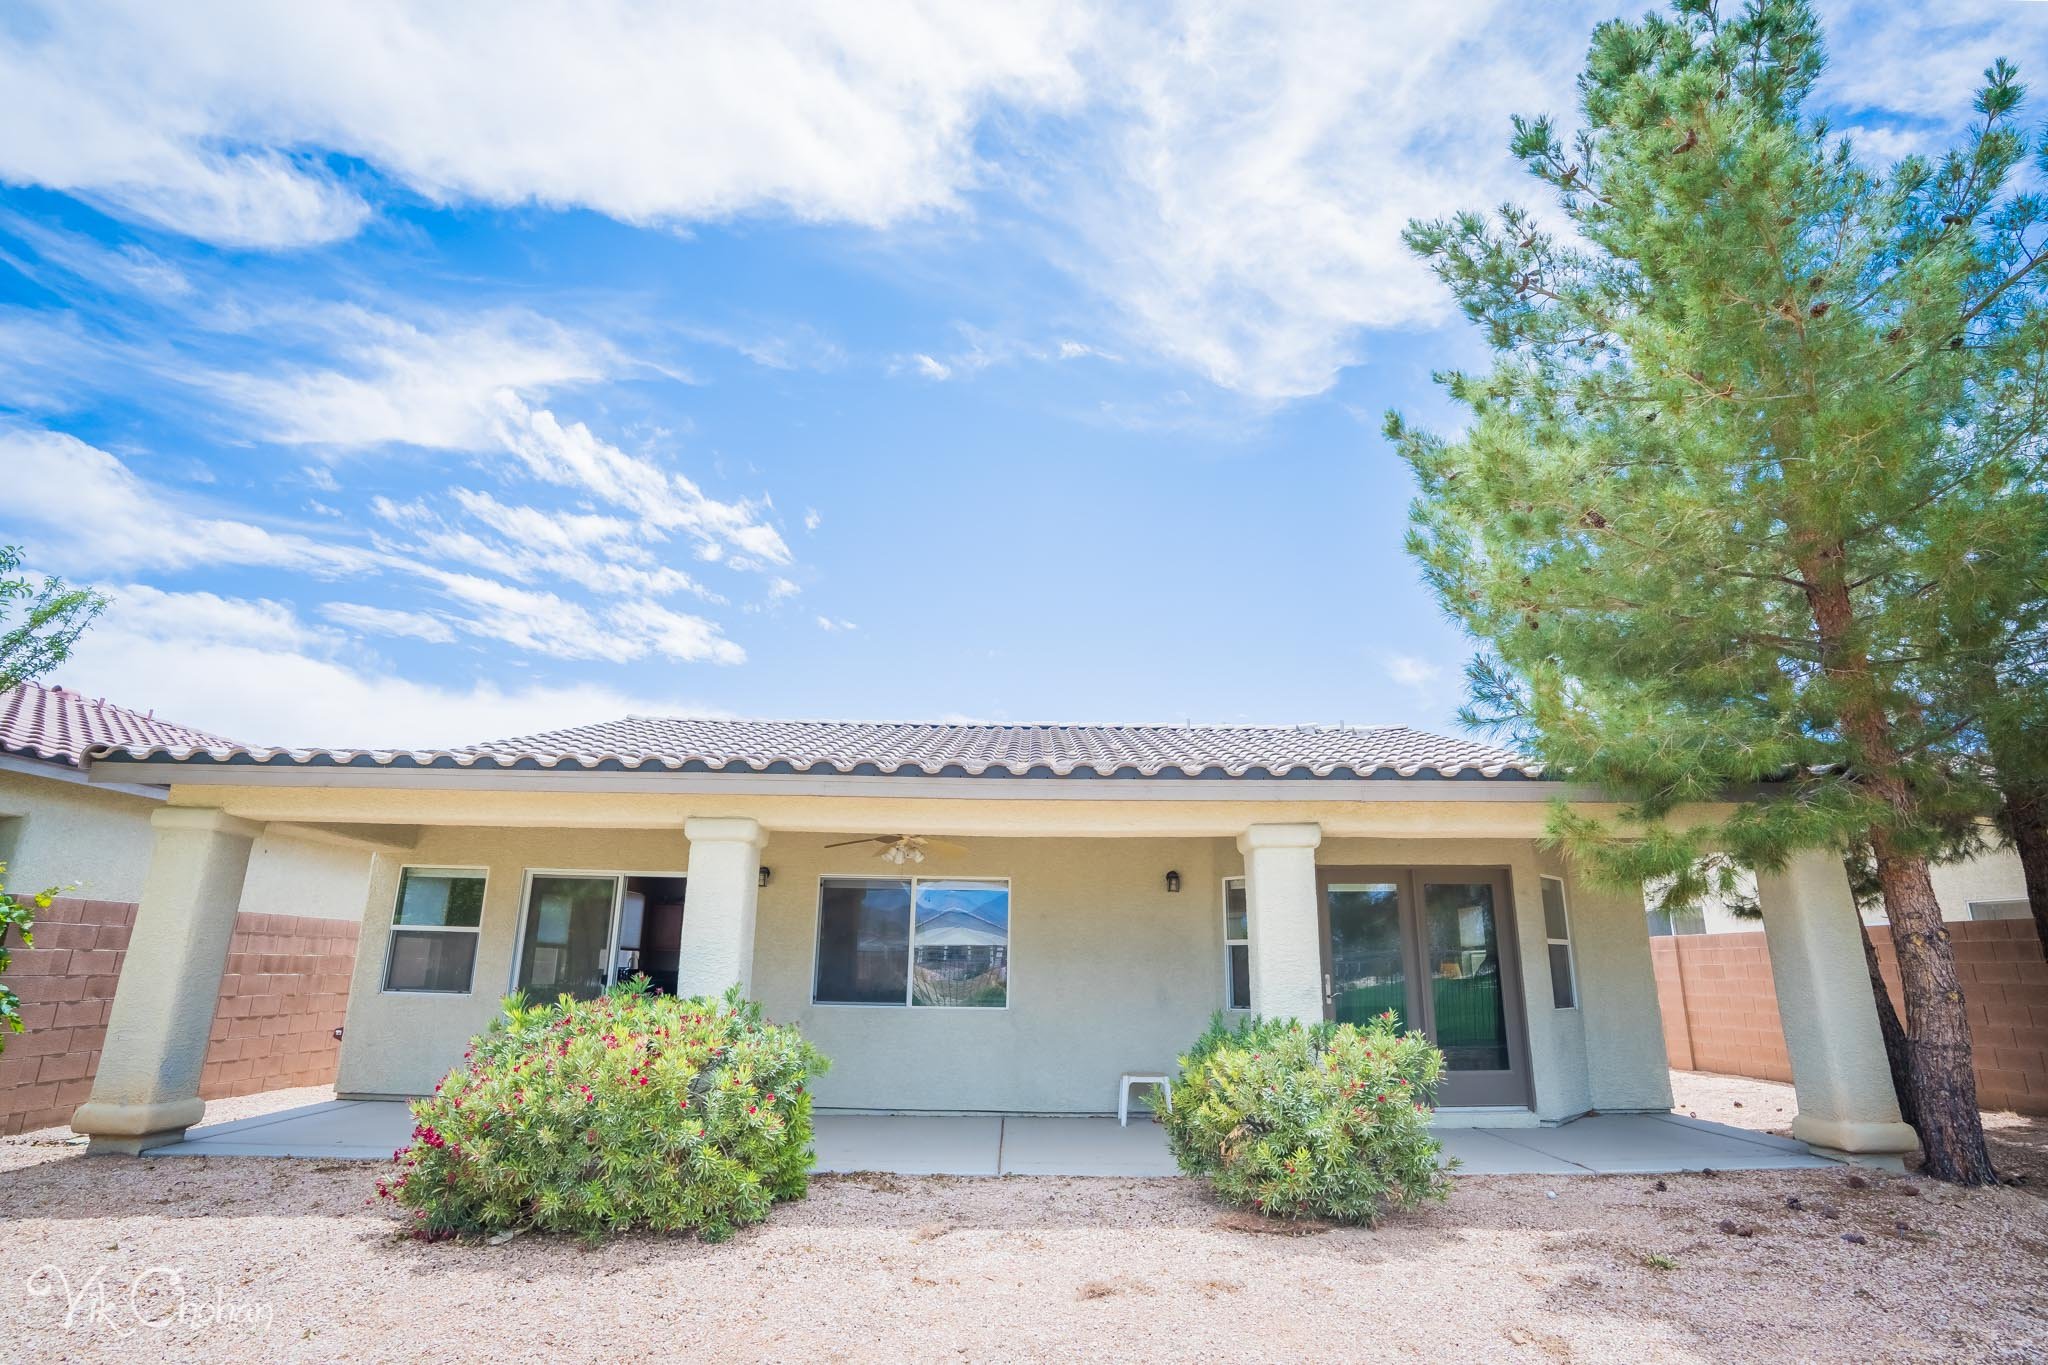 2022-05-15-5378-E-Cansano-St-Pahrump-Real-Estate-Photography-Virtual-Tour-Drone-Photography-Vik-Chohan-Photography-Photo-Booth-Social-Media-VCP-088.jpg